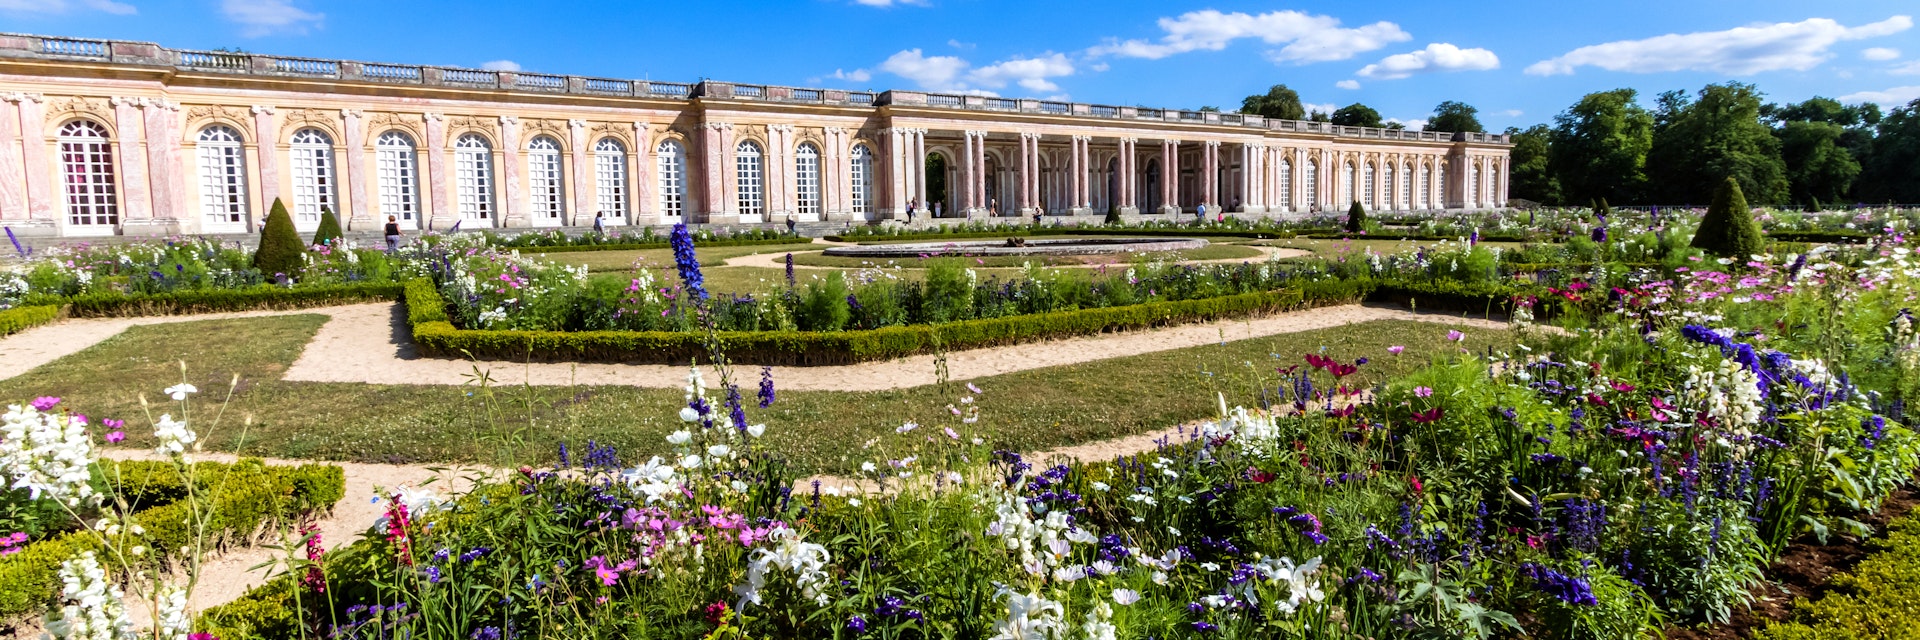 The Grand Trianon in the northwestern part of the Domain of Versailles.